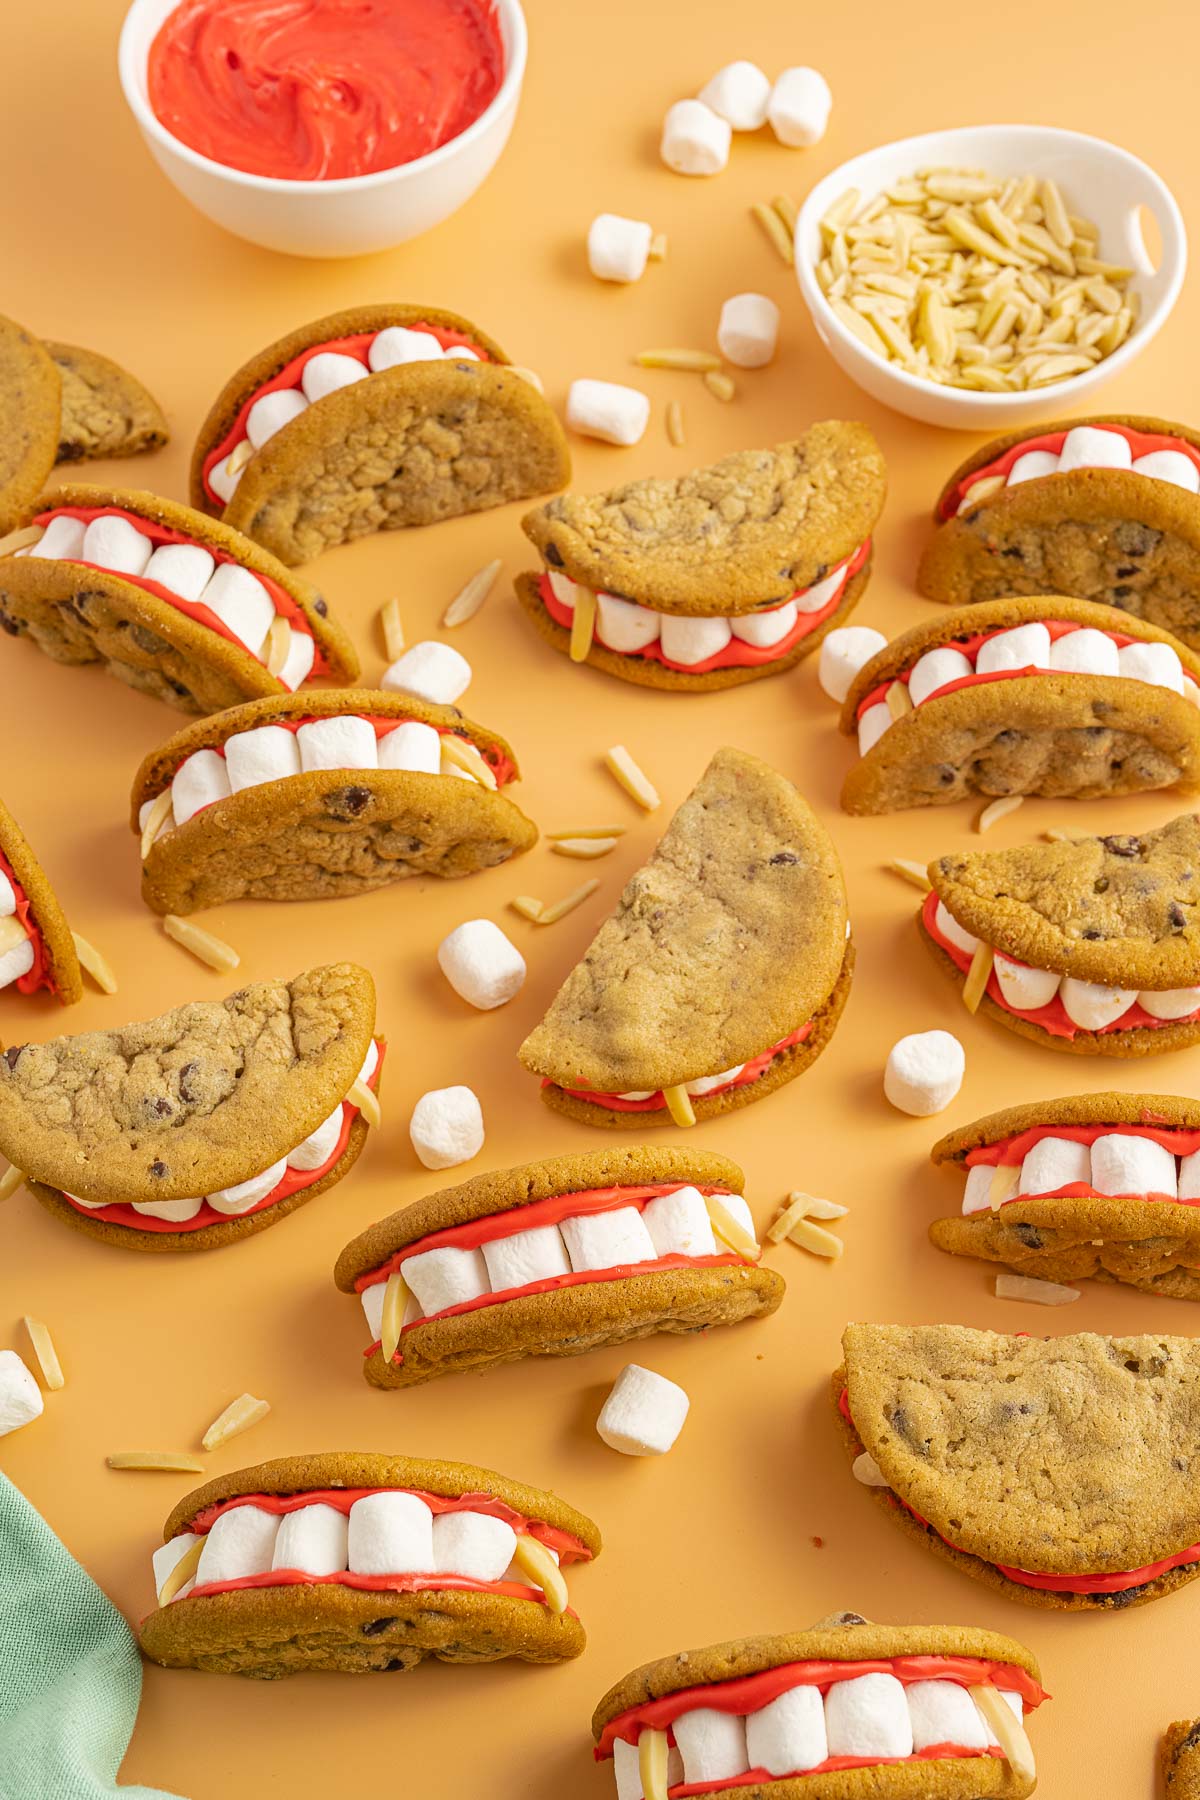 Dracula dentures cookies strewn about on an orange background.